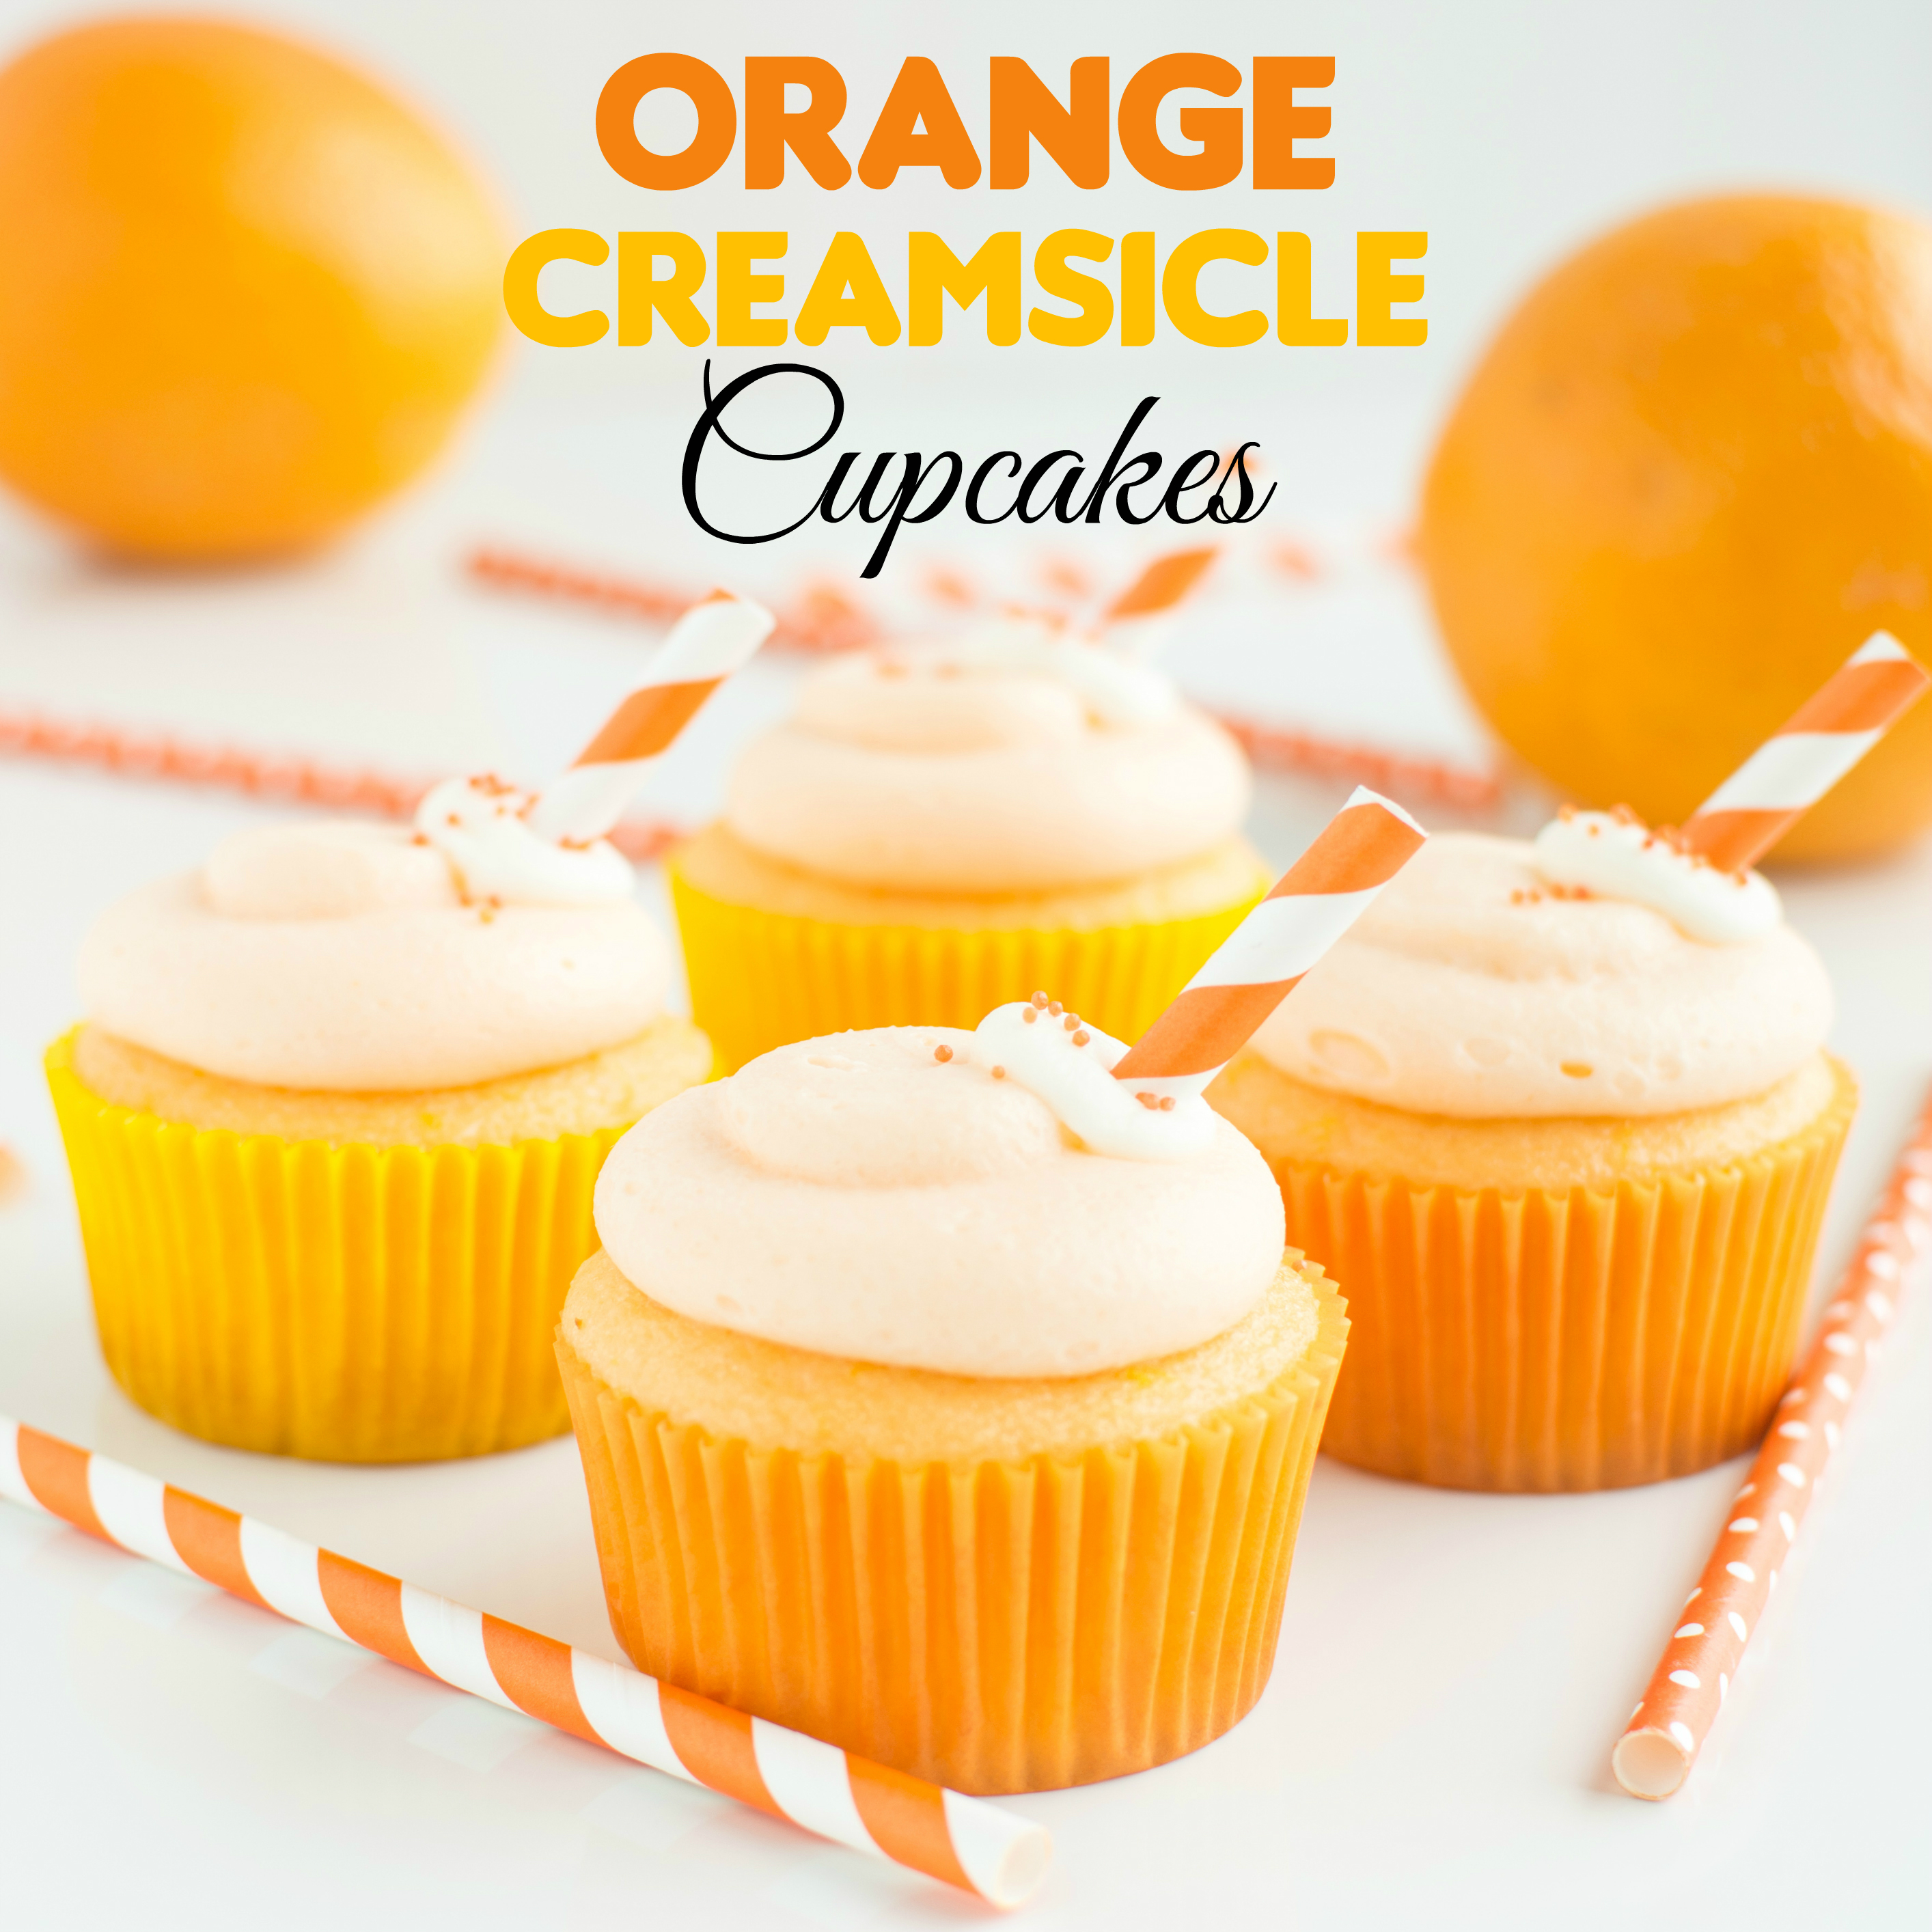 Orange Creamsicle Cupcakes with Filling